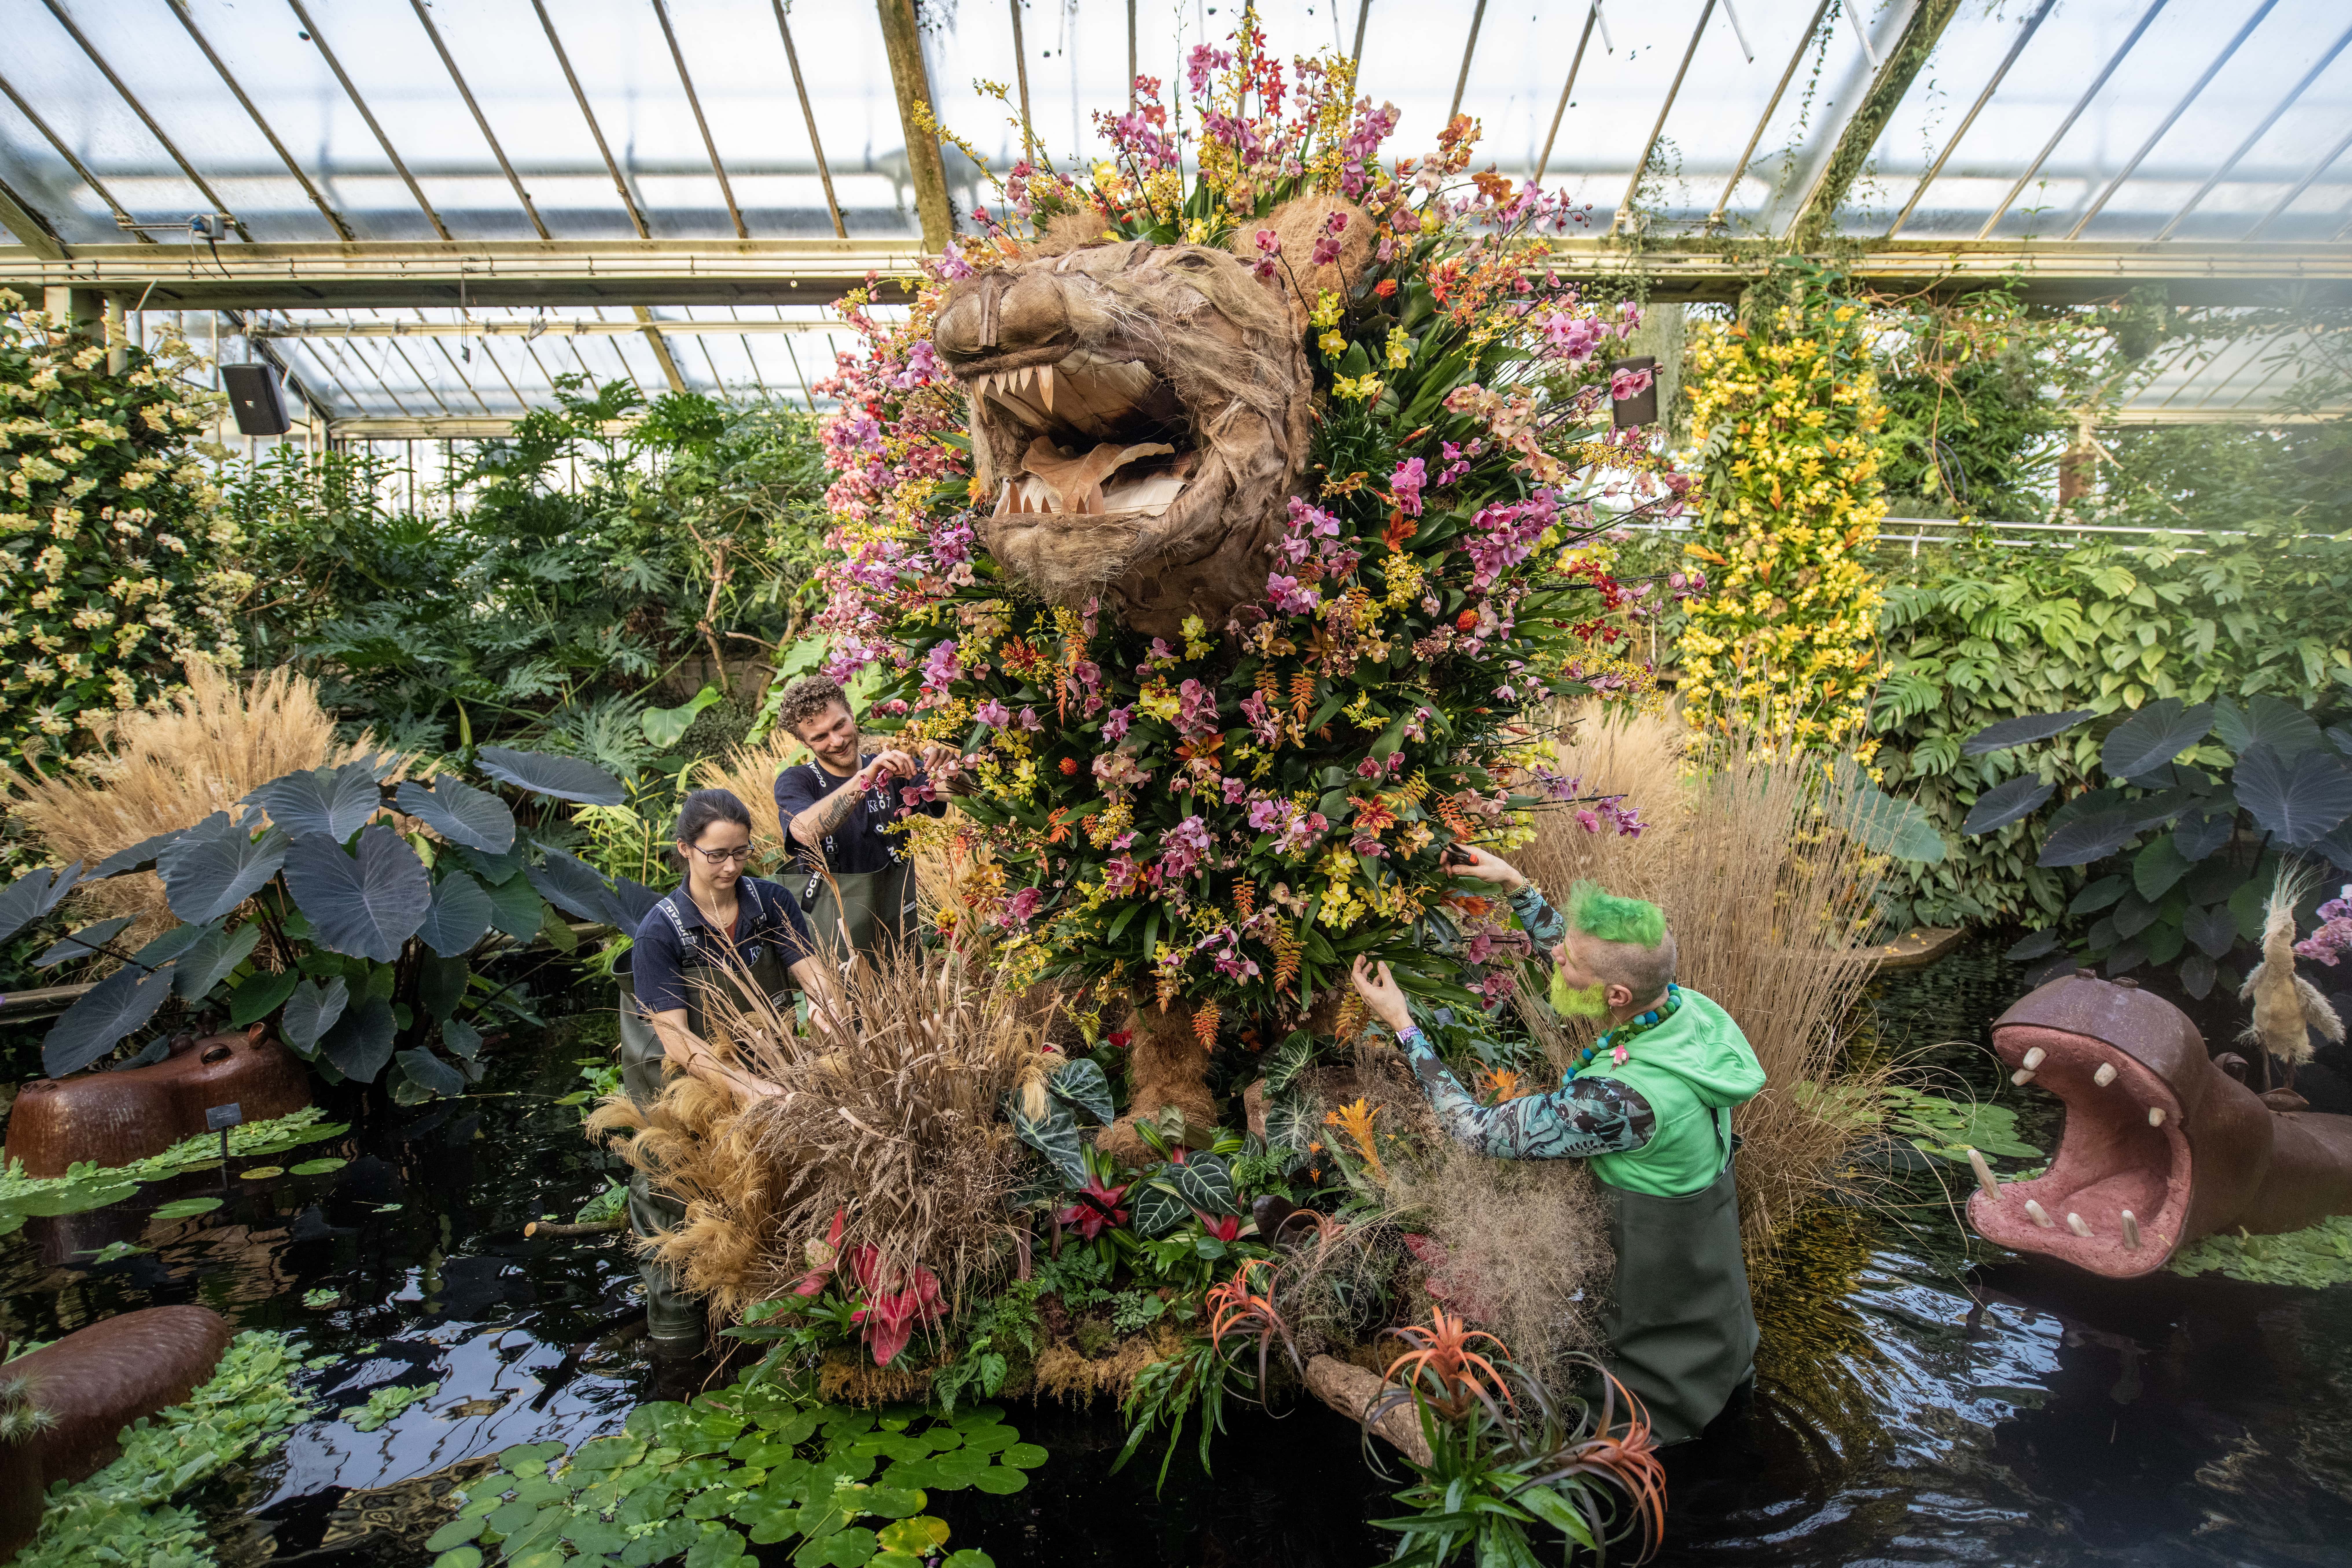 Kew horticulturalists tending to a large plant display of a lion